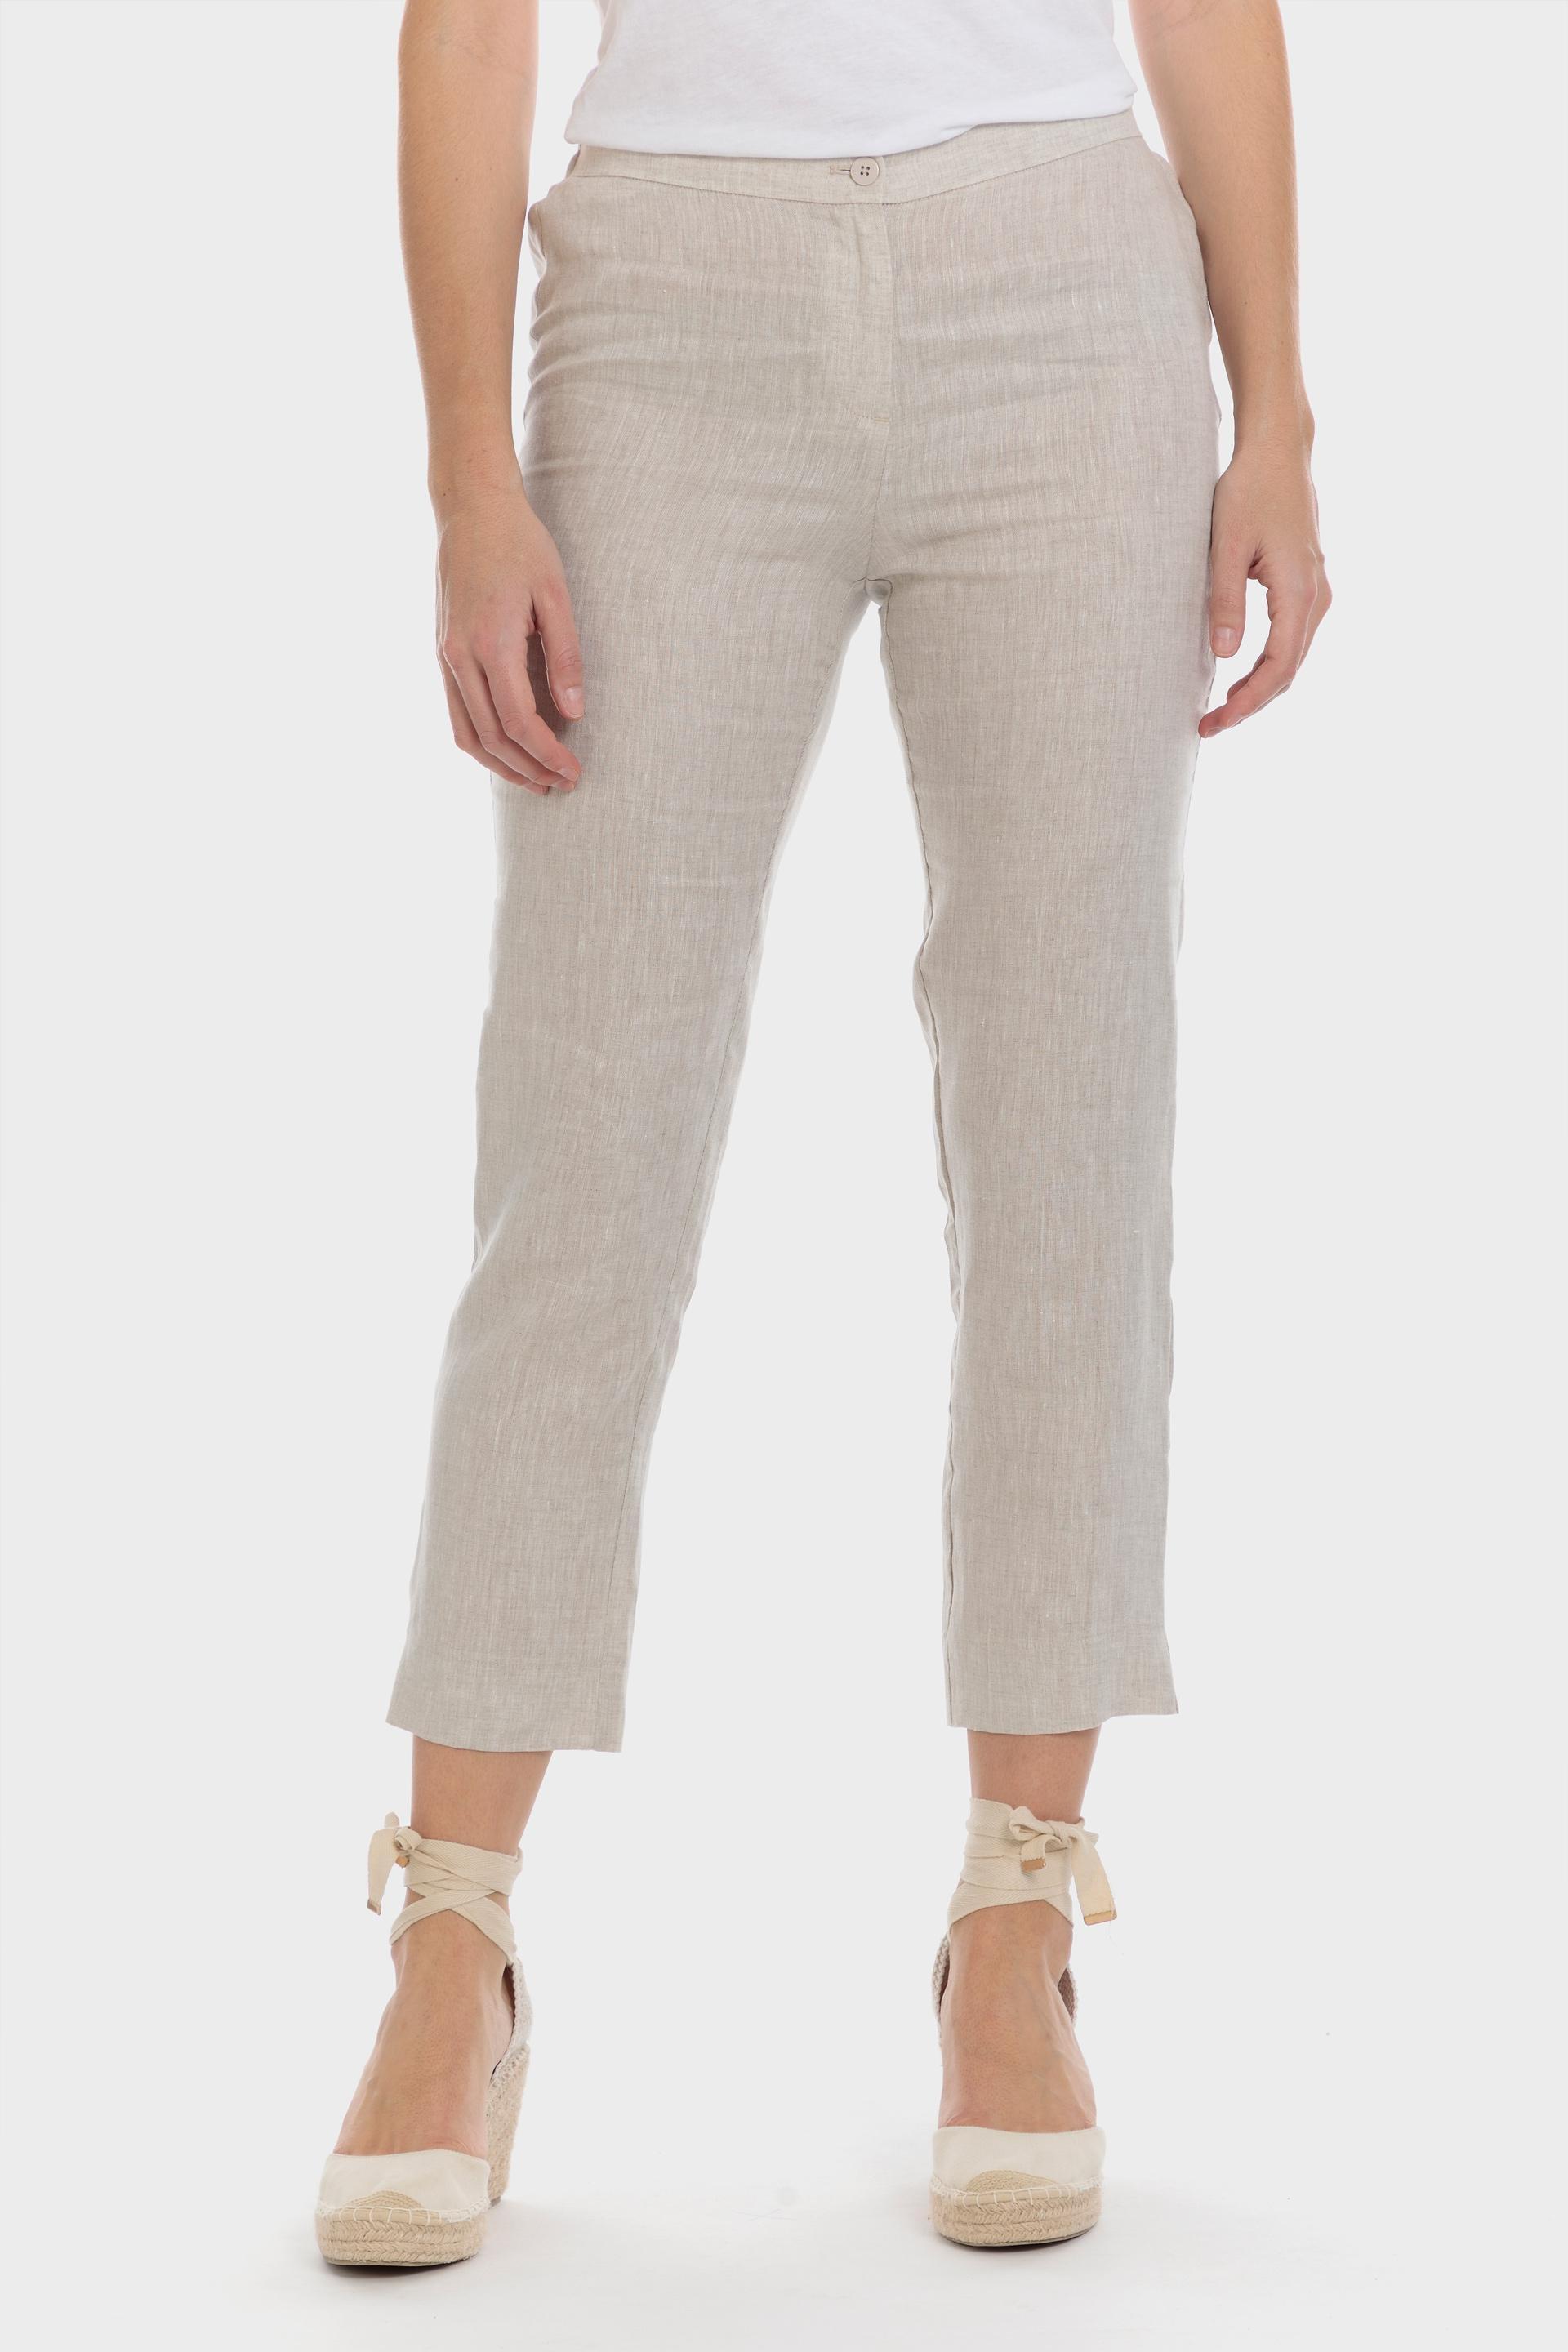 Punt Roma - Beige Zippered Linen Trousers